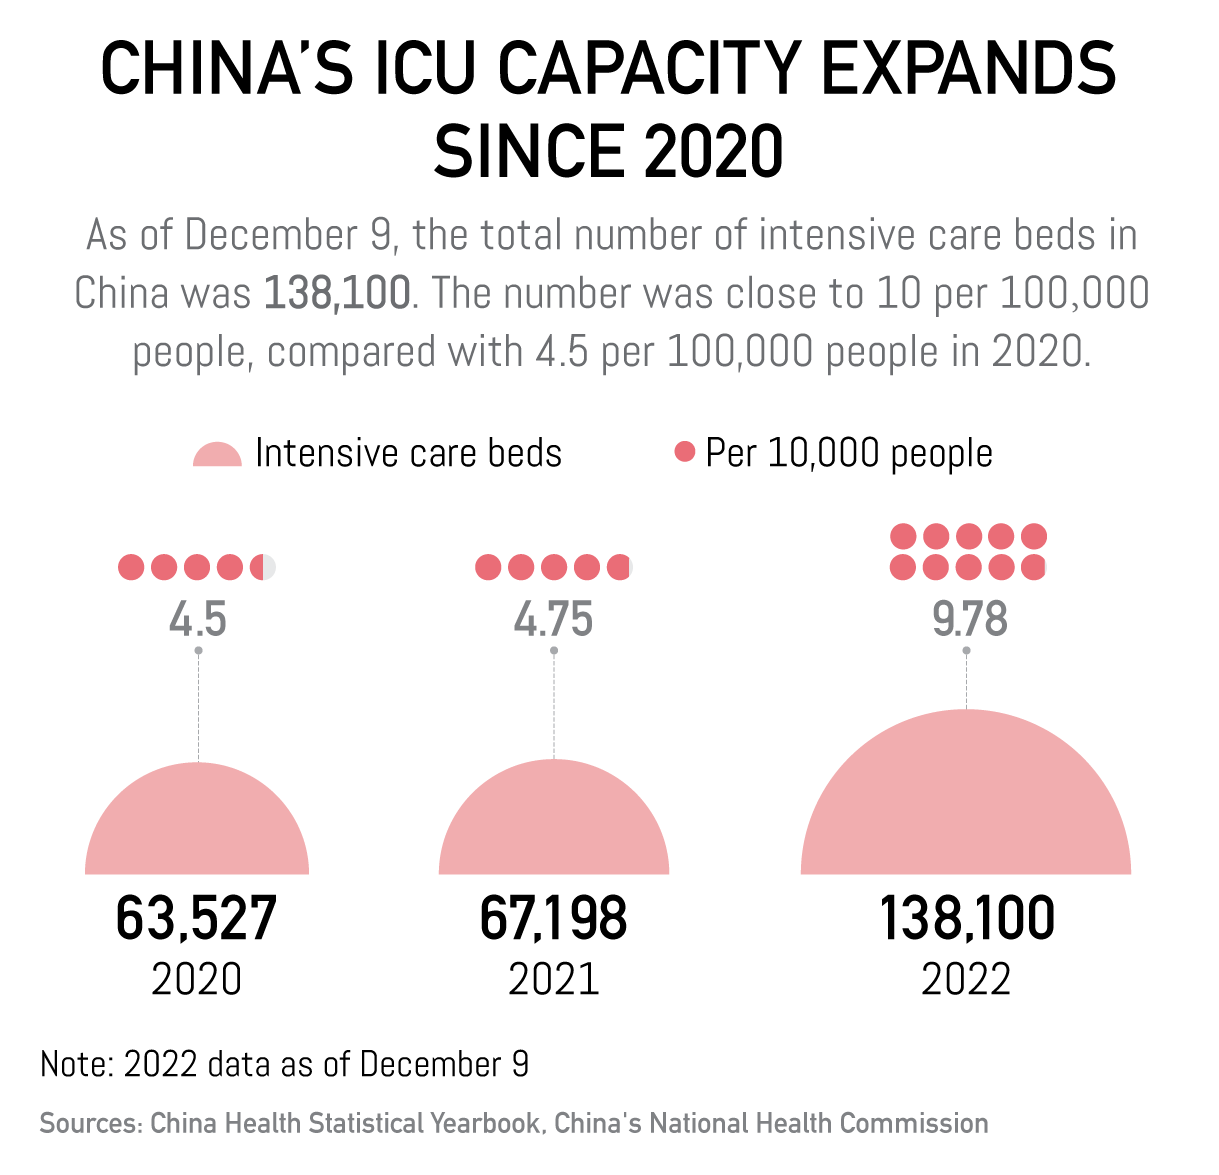 China's COVID-19 fight in numbers: China's ICU capacity expands since 2020